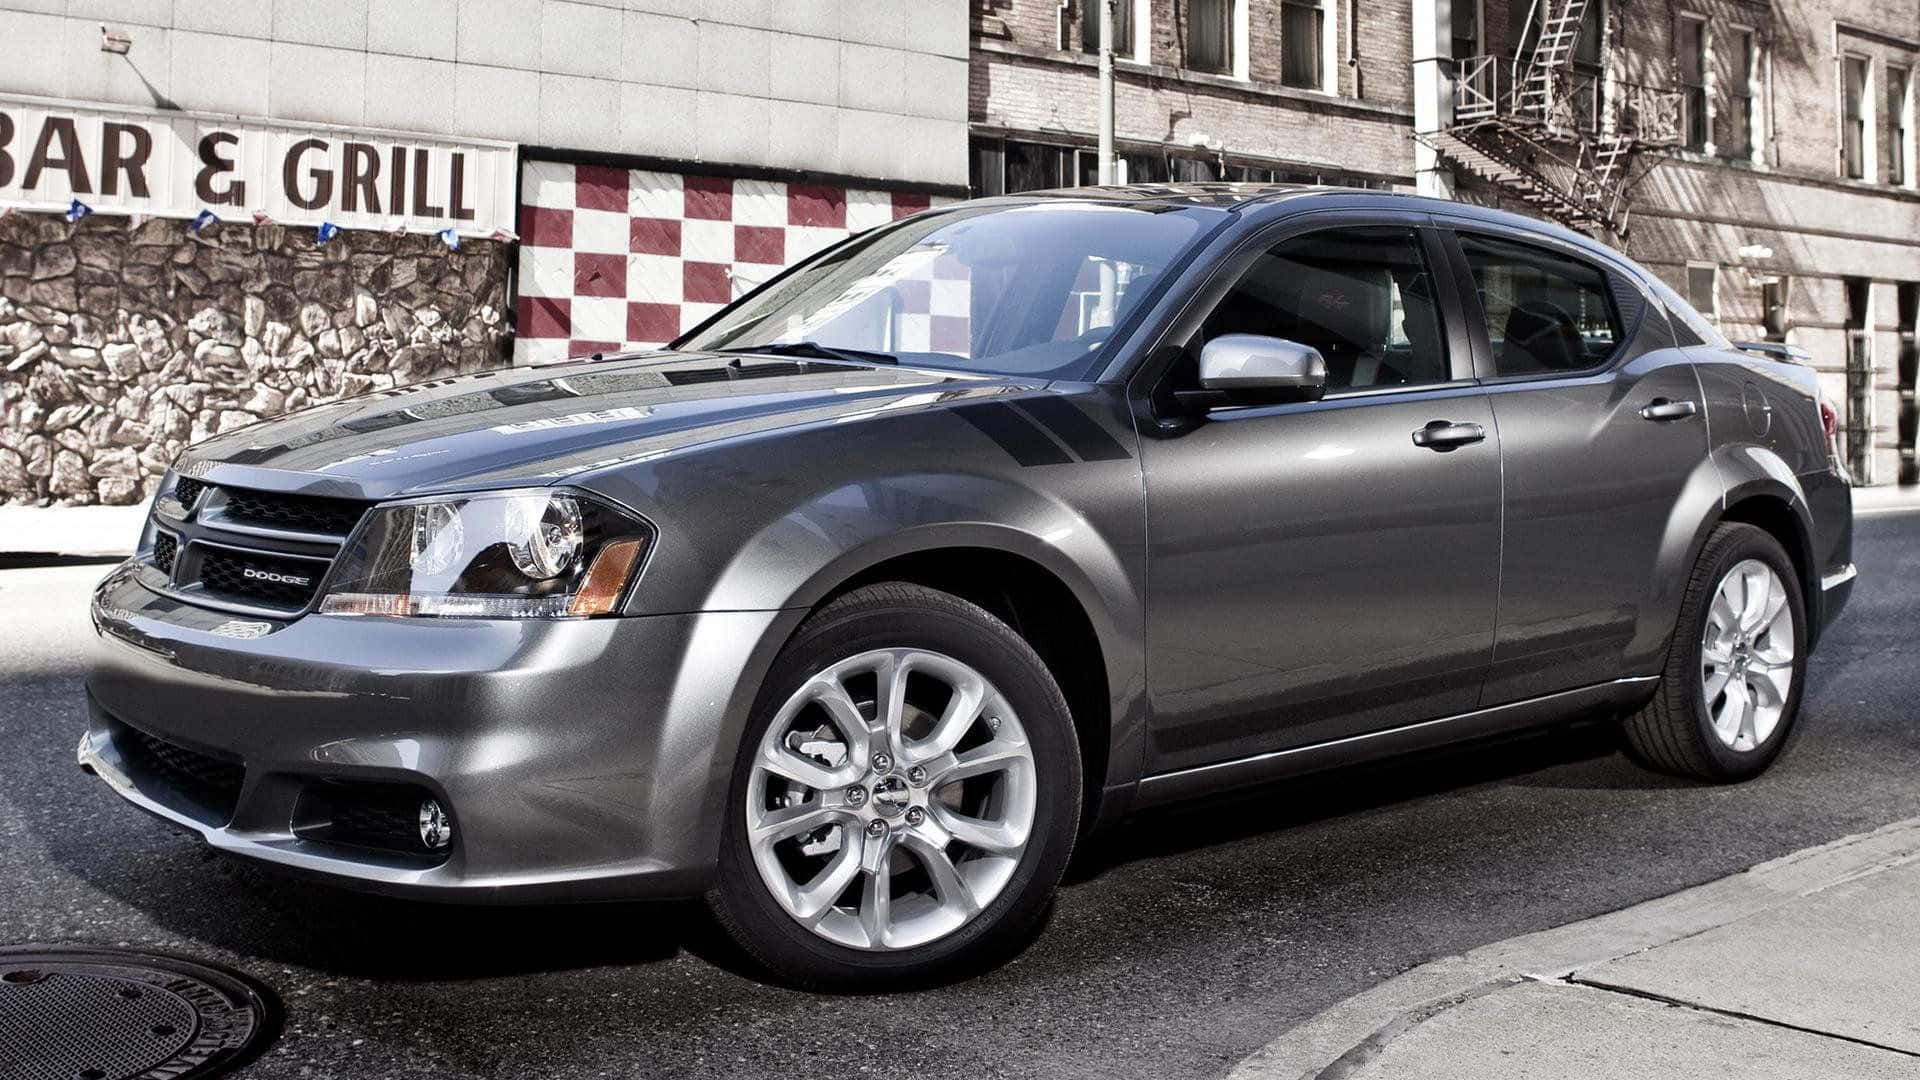 An Impeccable Silver Dodge Avenger Showcasing Elegance And Power Wallpaper